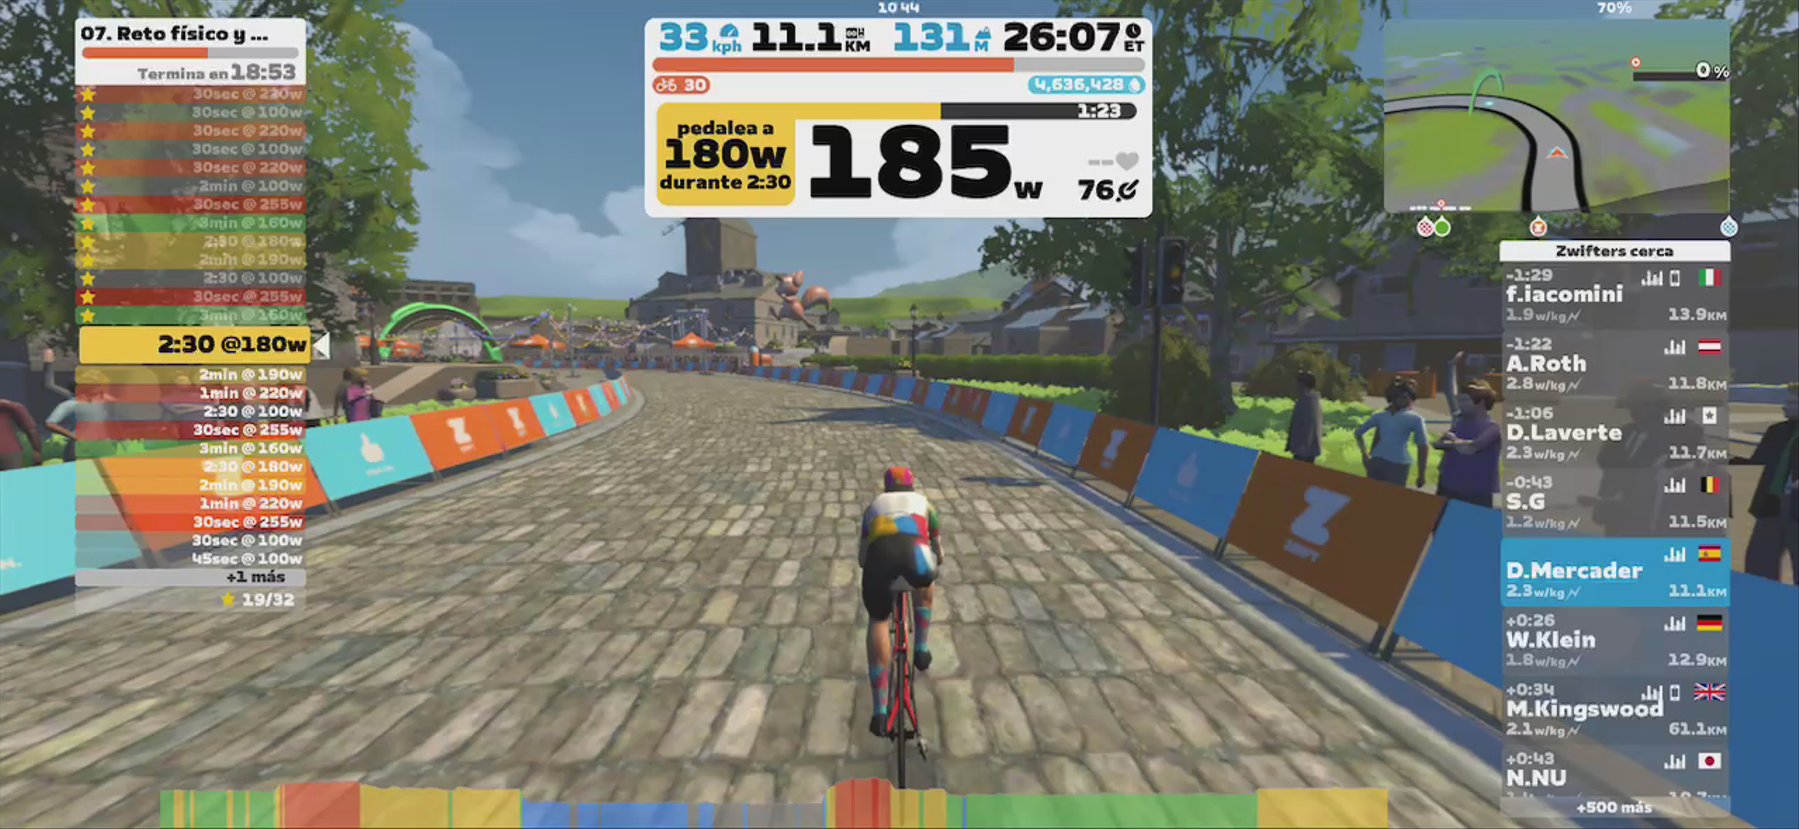 Zwift - 07. Hustle and Flow in France